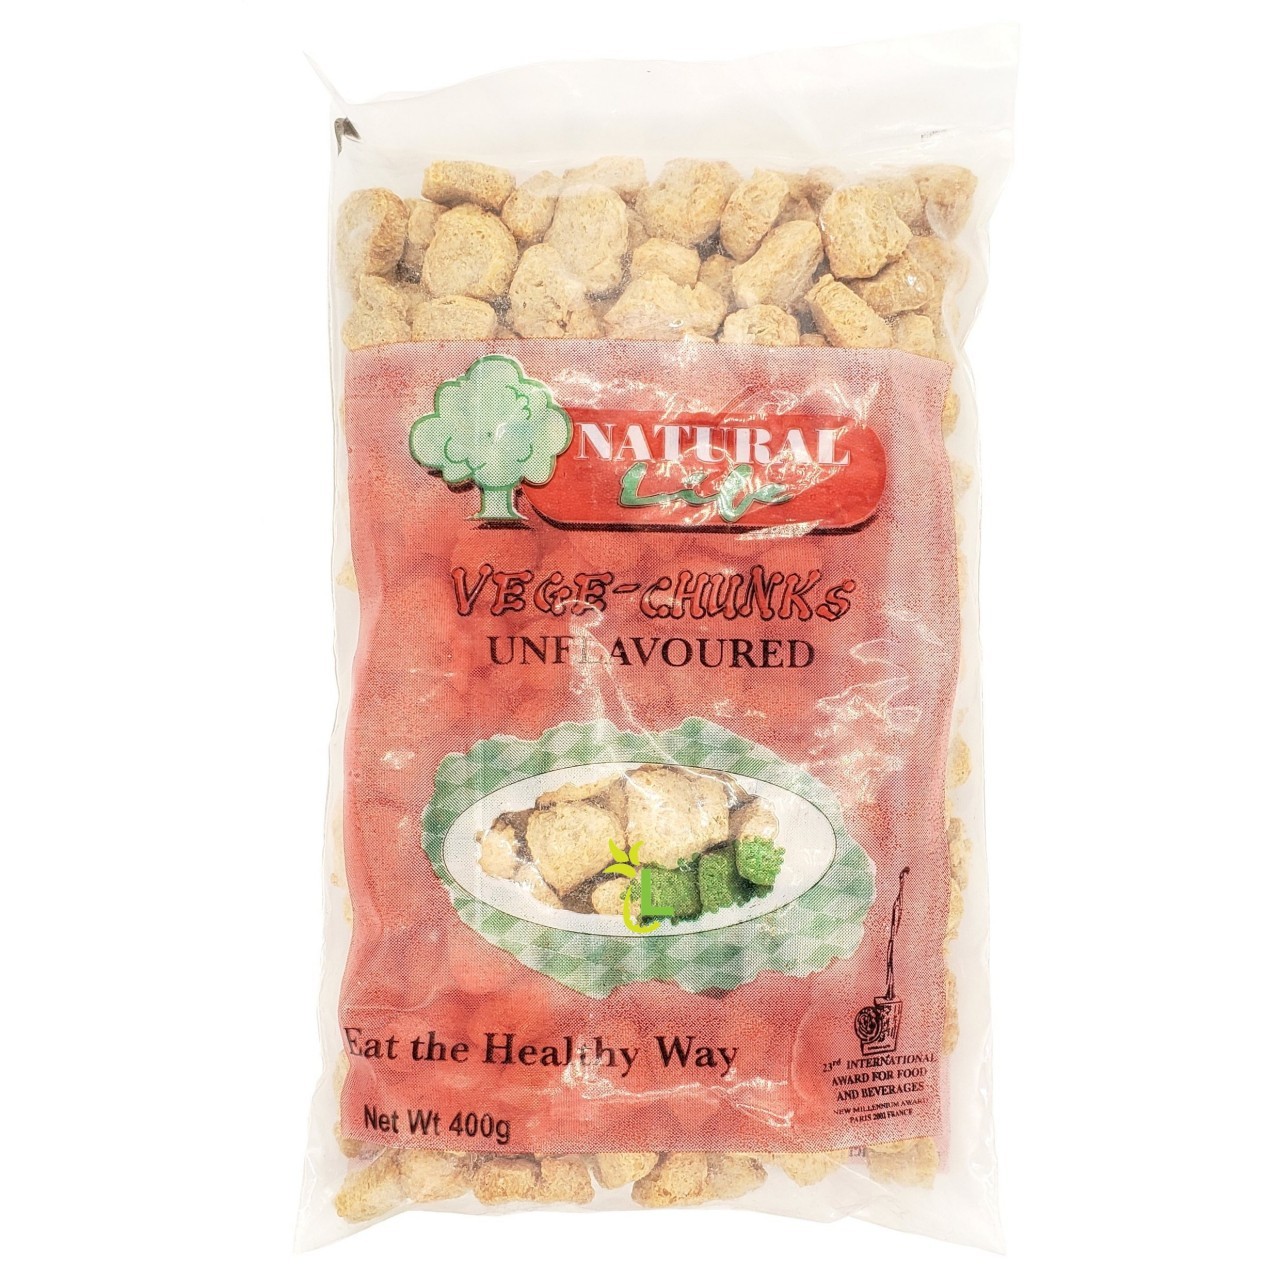 NATURAL LIFE VEGE CHUNKS UNFLAVOURED 400G